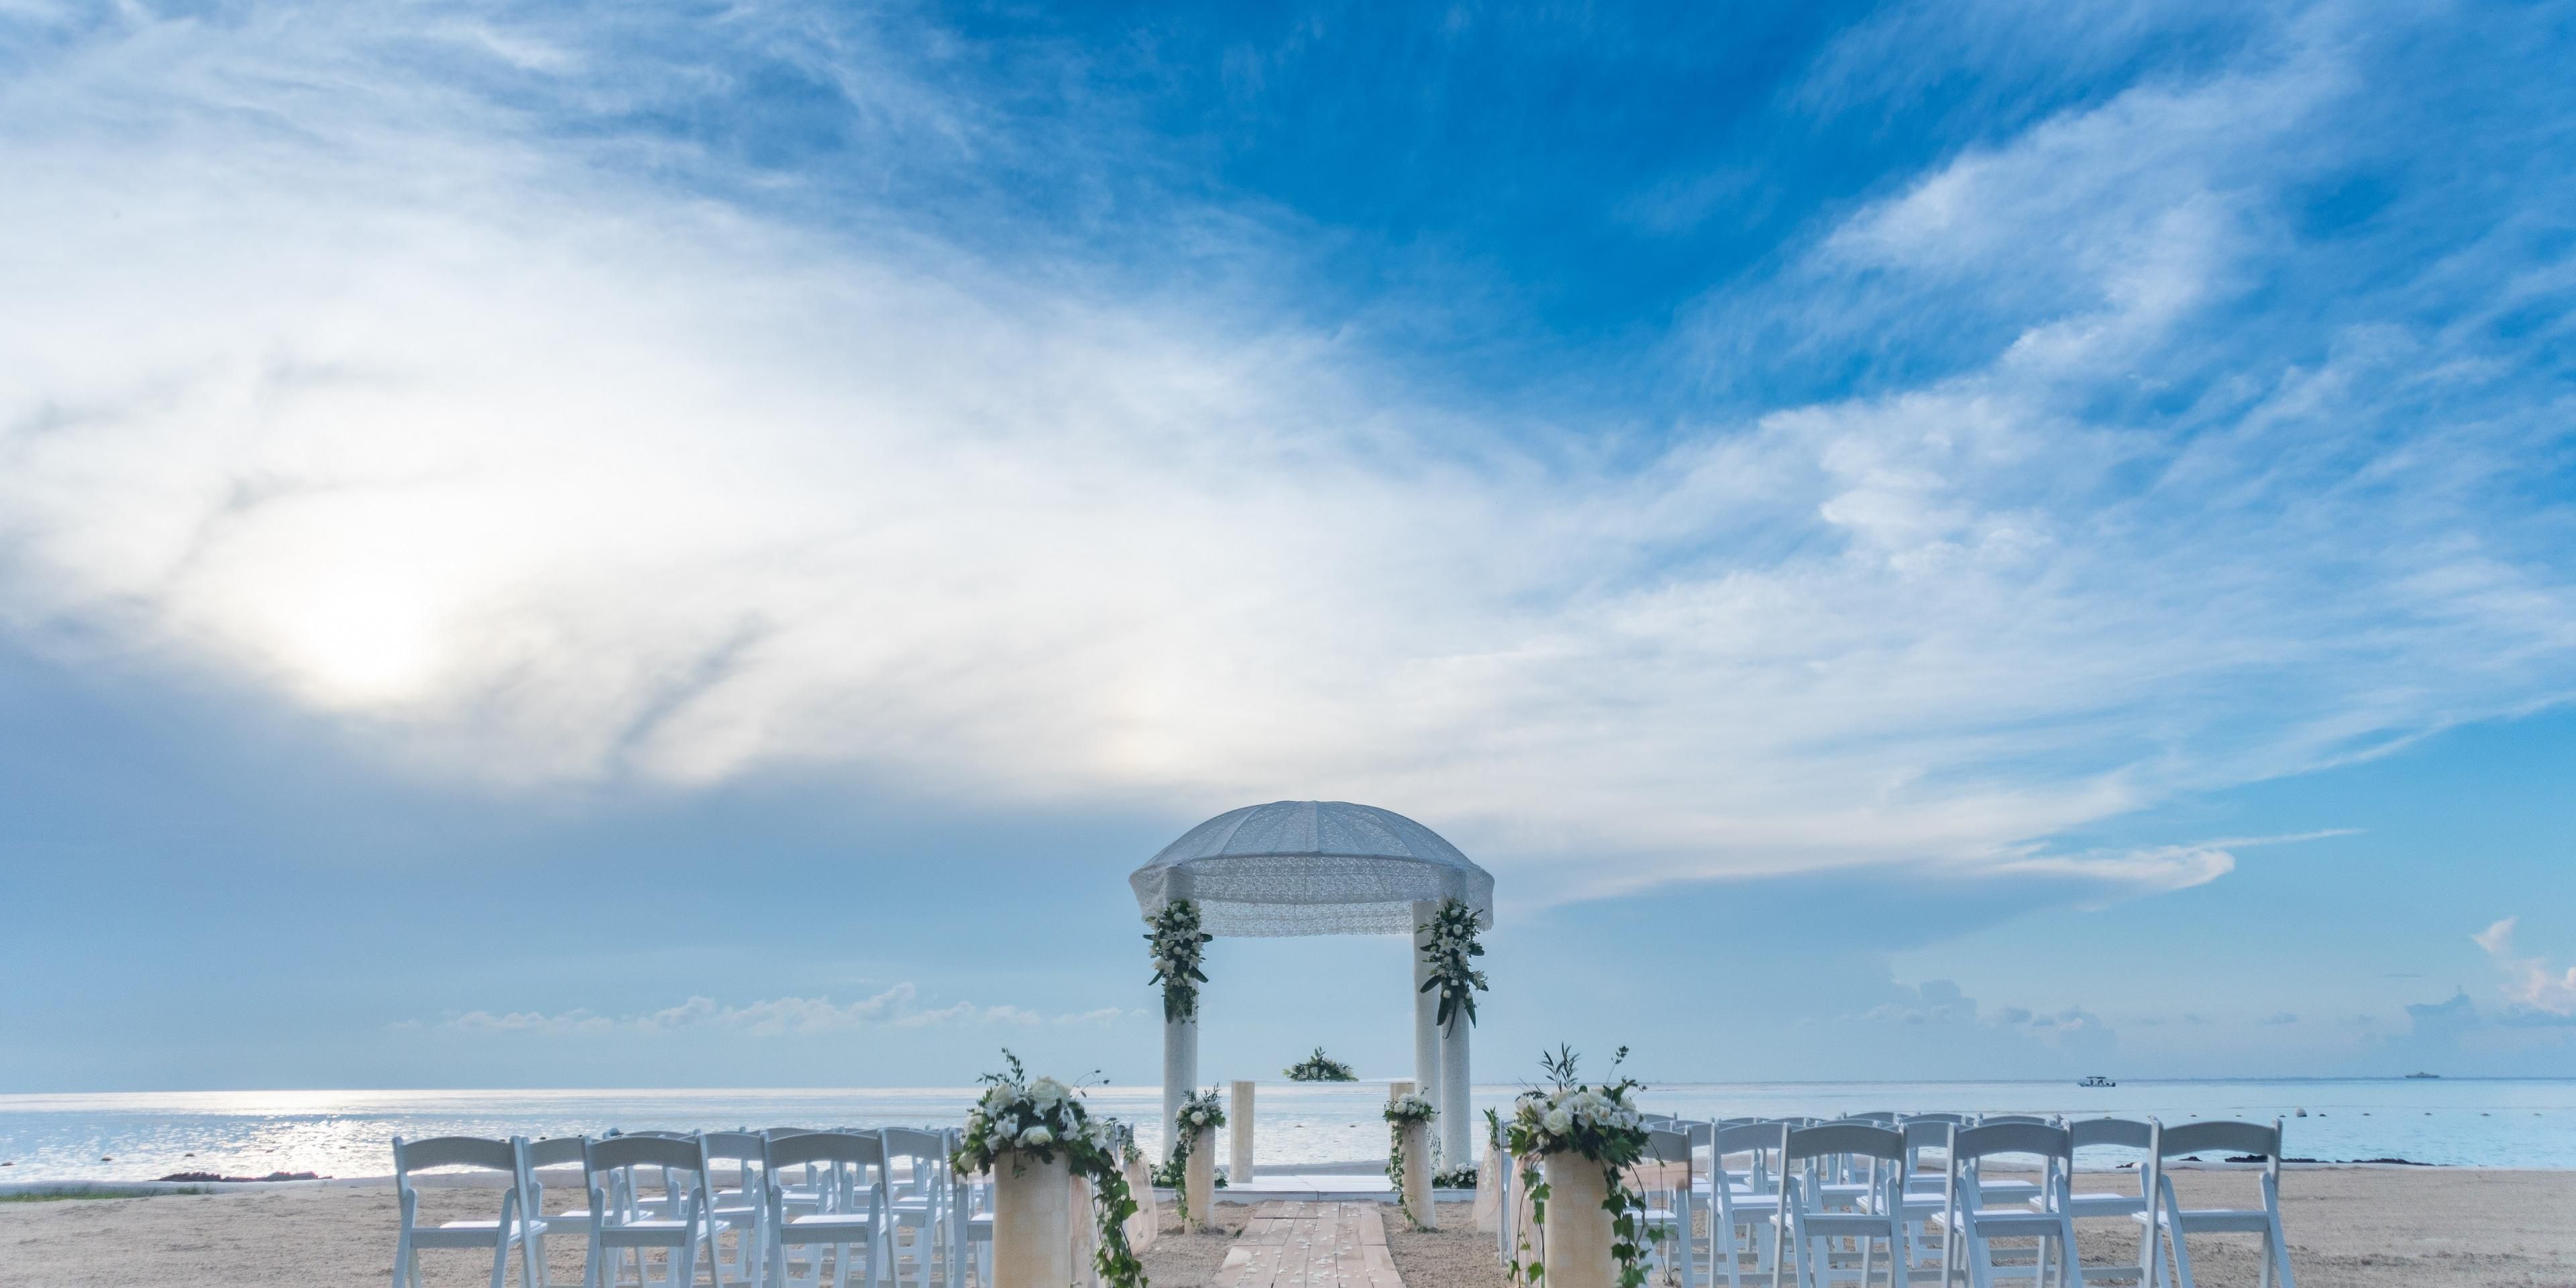 Live Your Dream Wedding: Embark on an Unforgettable Journey! Explore a top-tier Cozumel luxury resort, meticulously designed for utmost comfort with exquisite details. Immerse in a fusion of culture and nature, creating an authentic and cherished celebration.